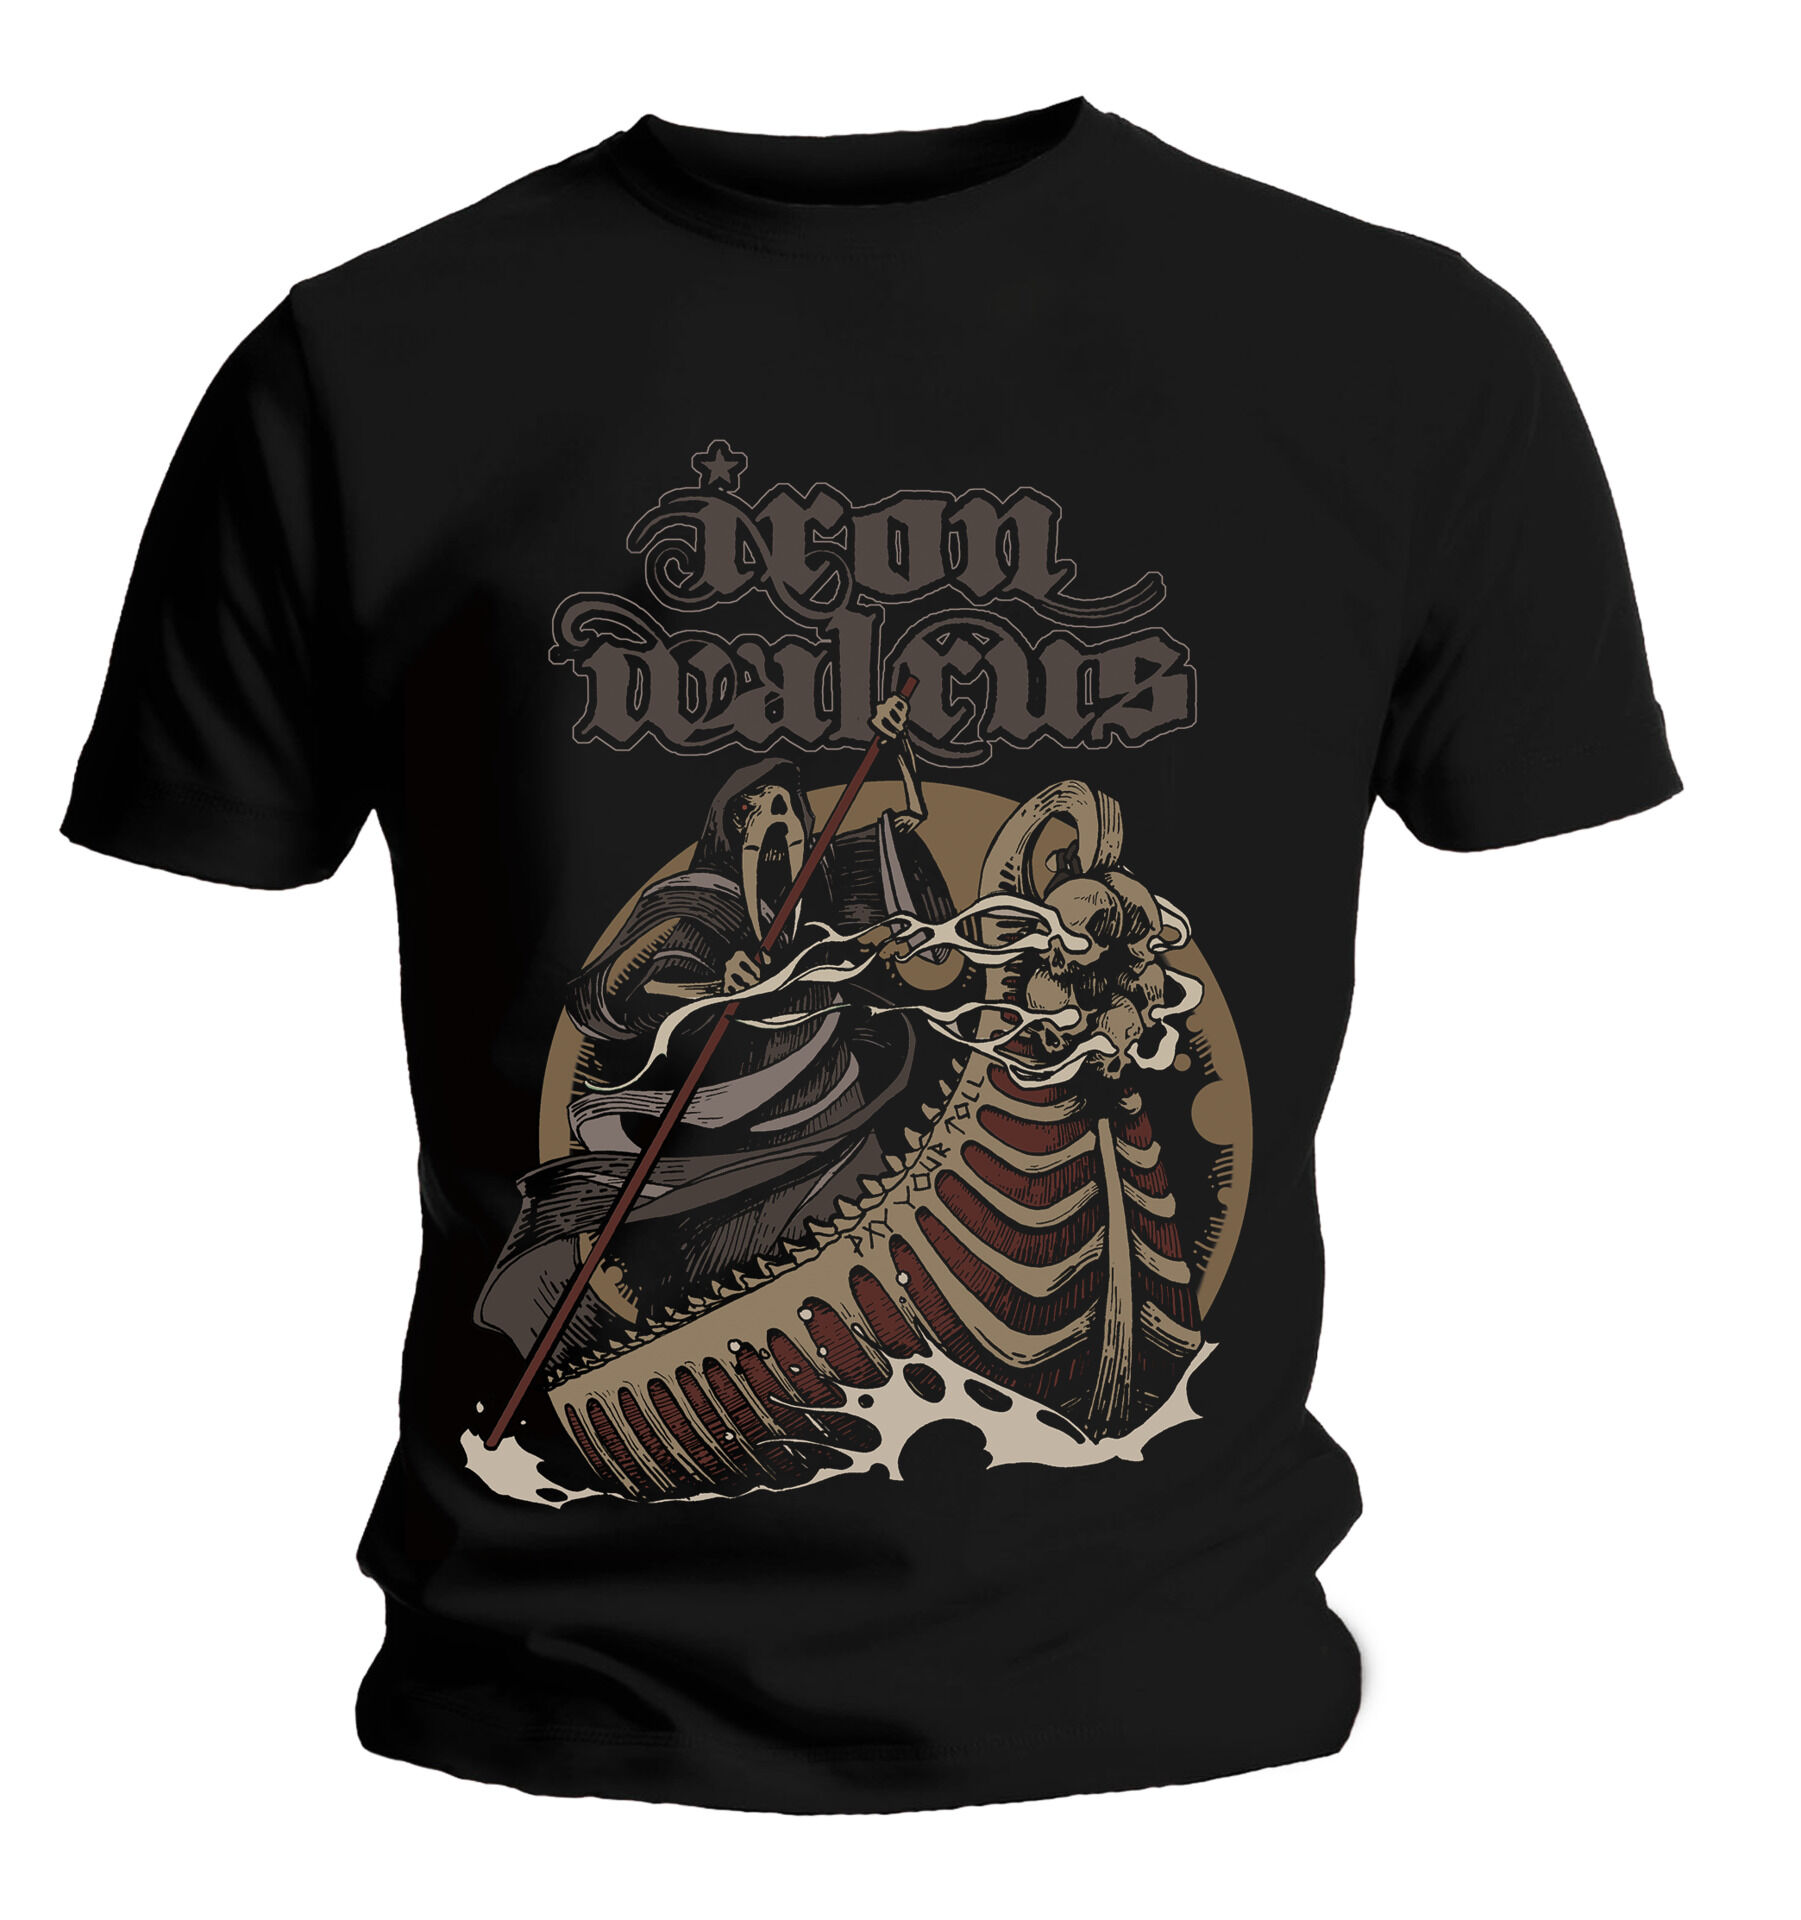 IRON WALRUS - Pay Your Toll  [T-SHIRT]